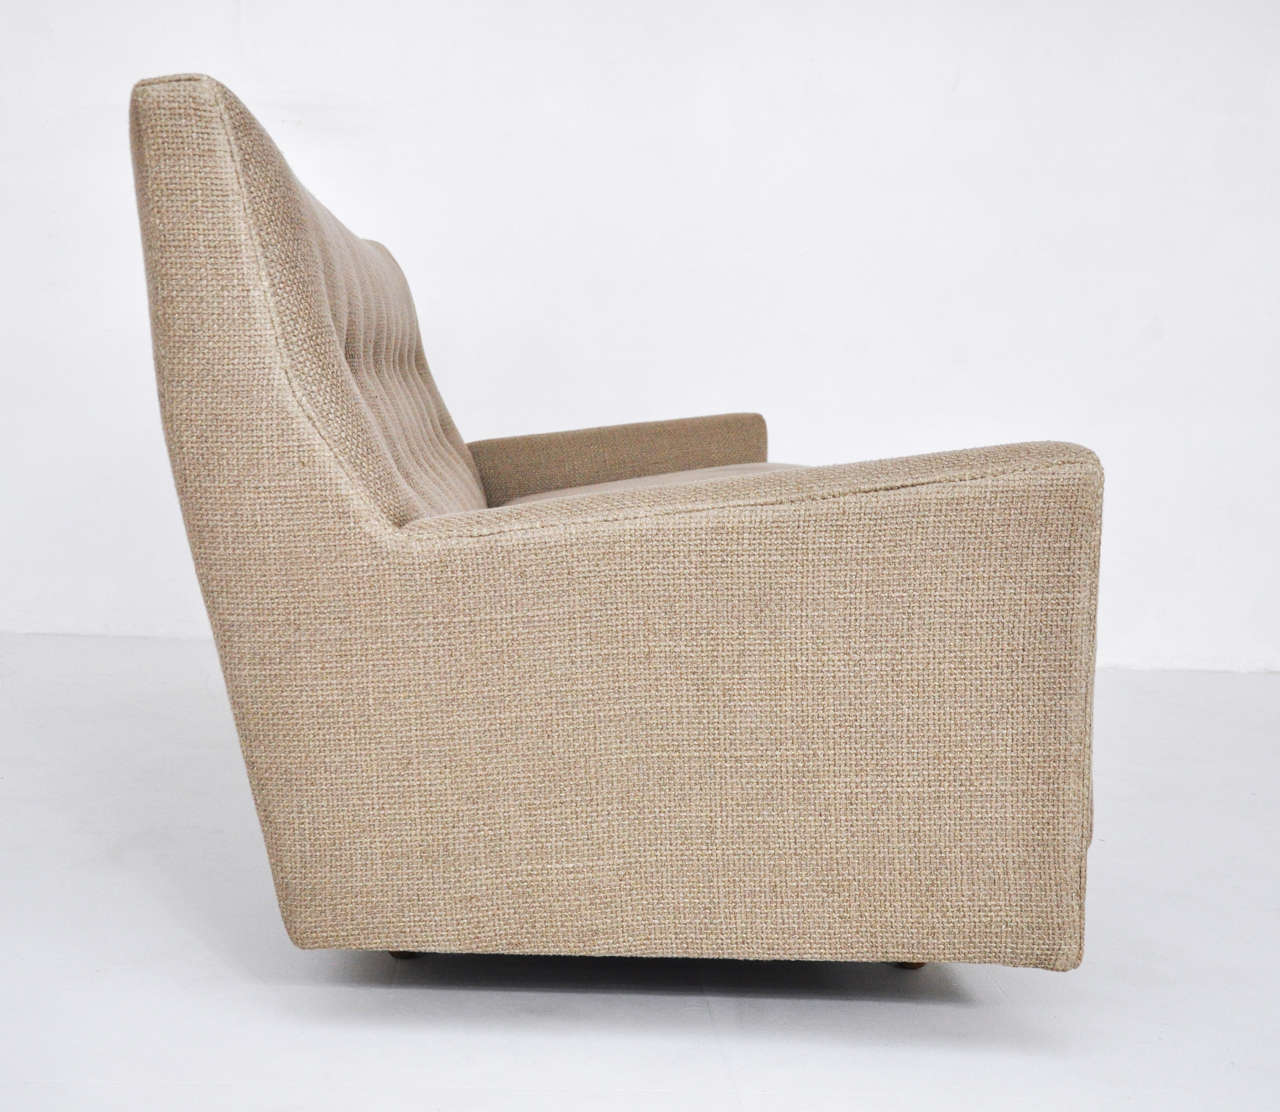 Early and Rare Sofa by Jens Risom, 1950s 2